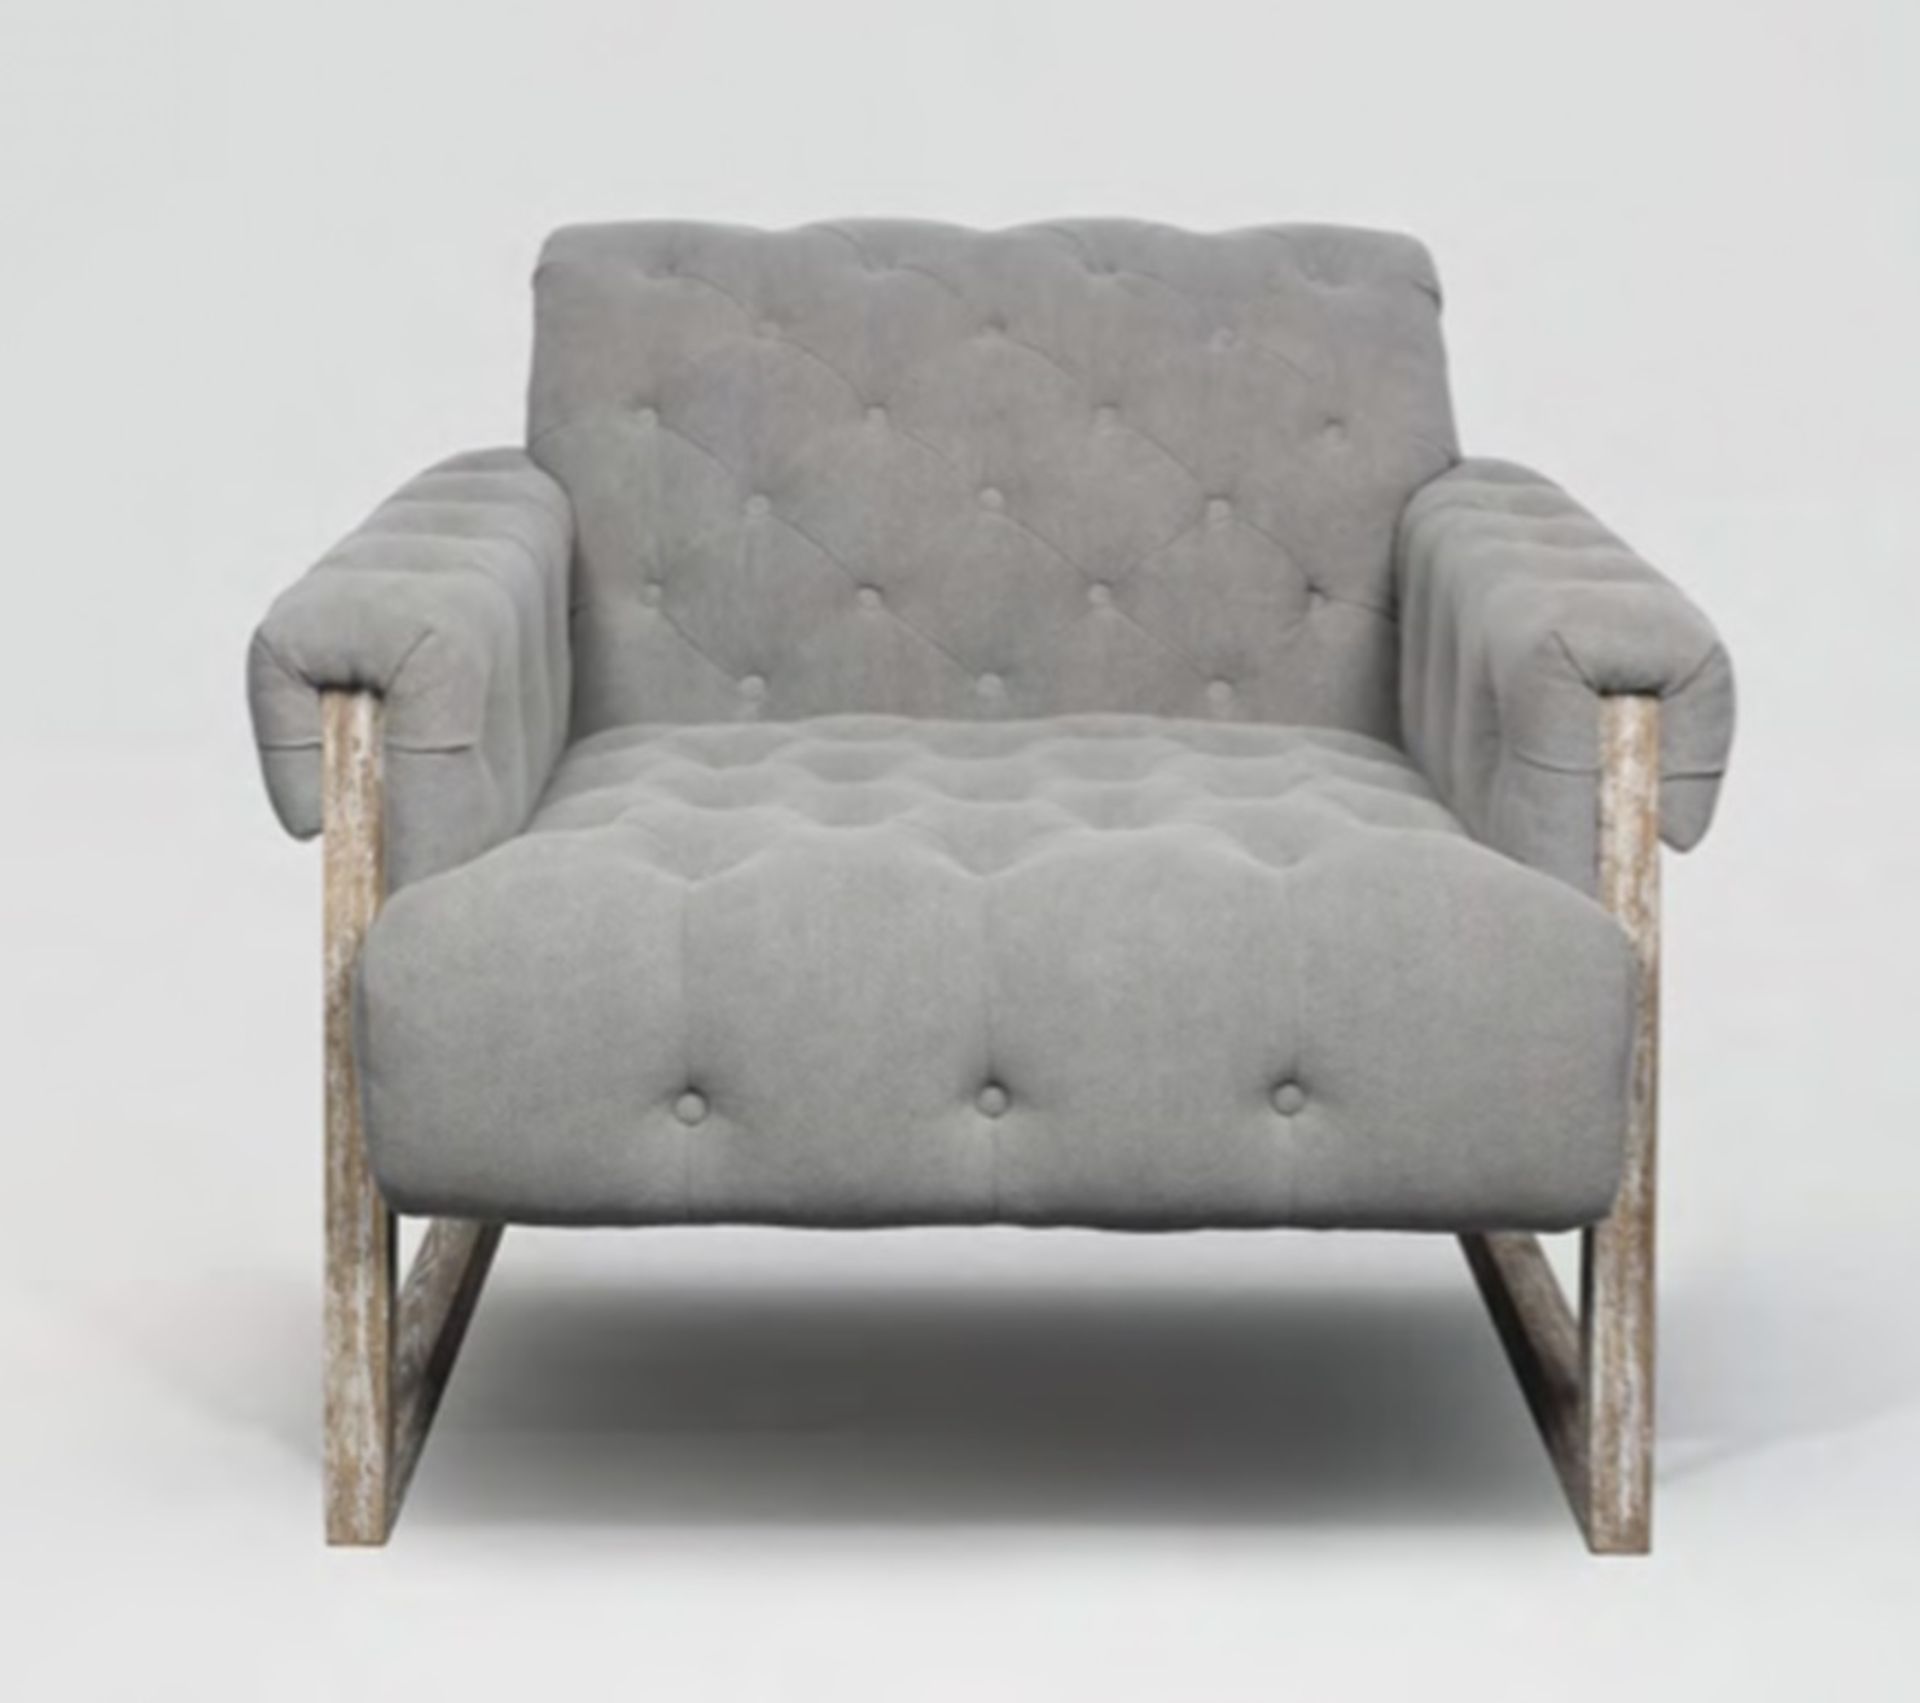 Morgan Tufted armchair  Deep tufted armchair covered in a stone grey Linen mix fabric all mounted on